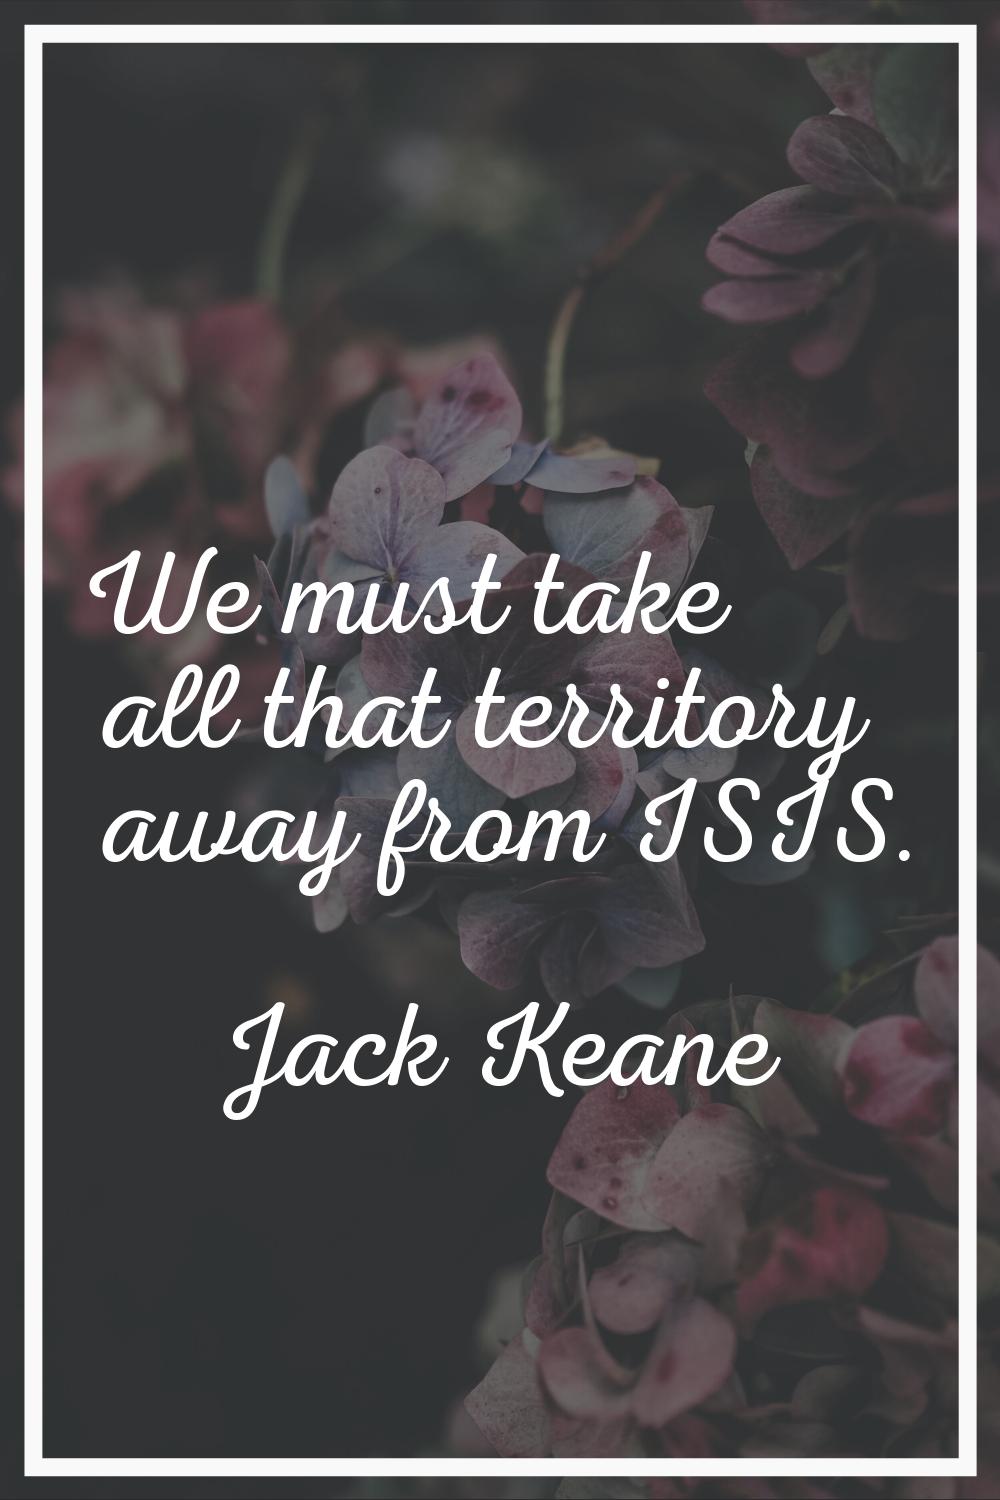 We must take all that territory away from ISIS.